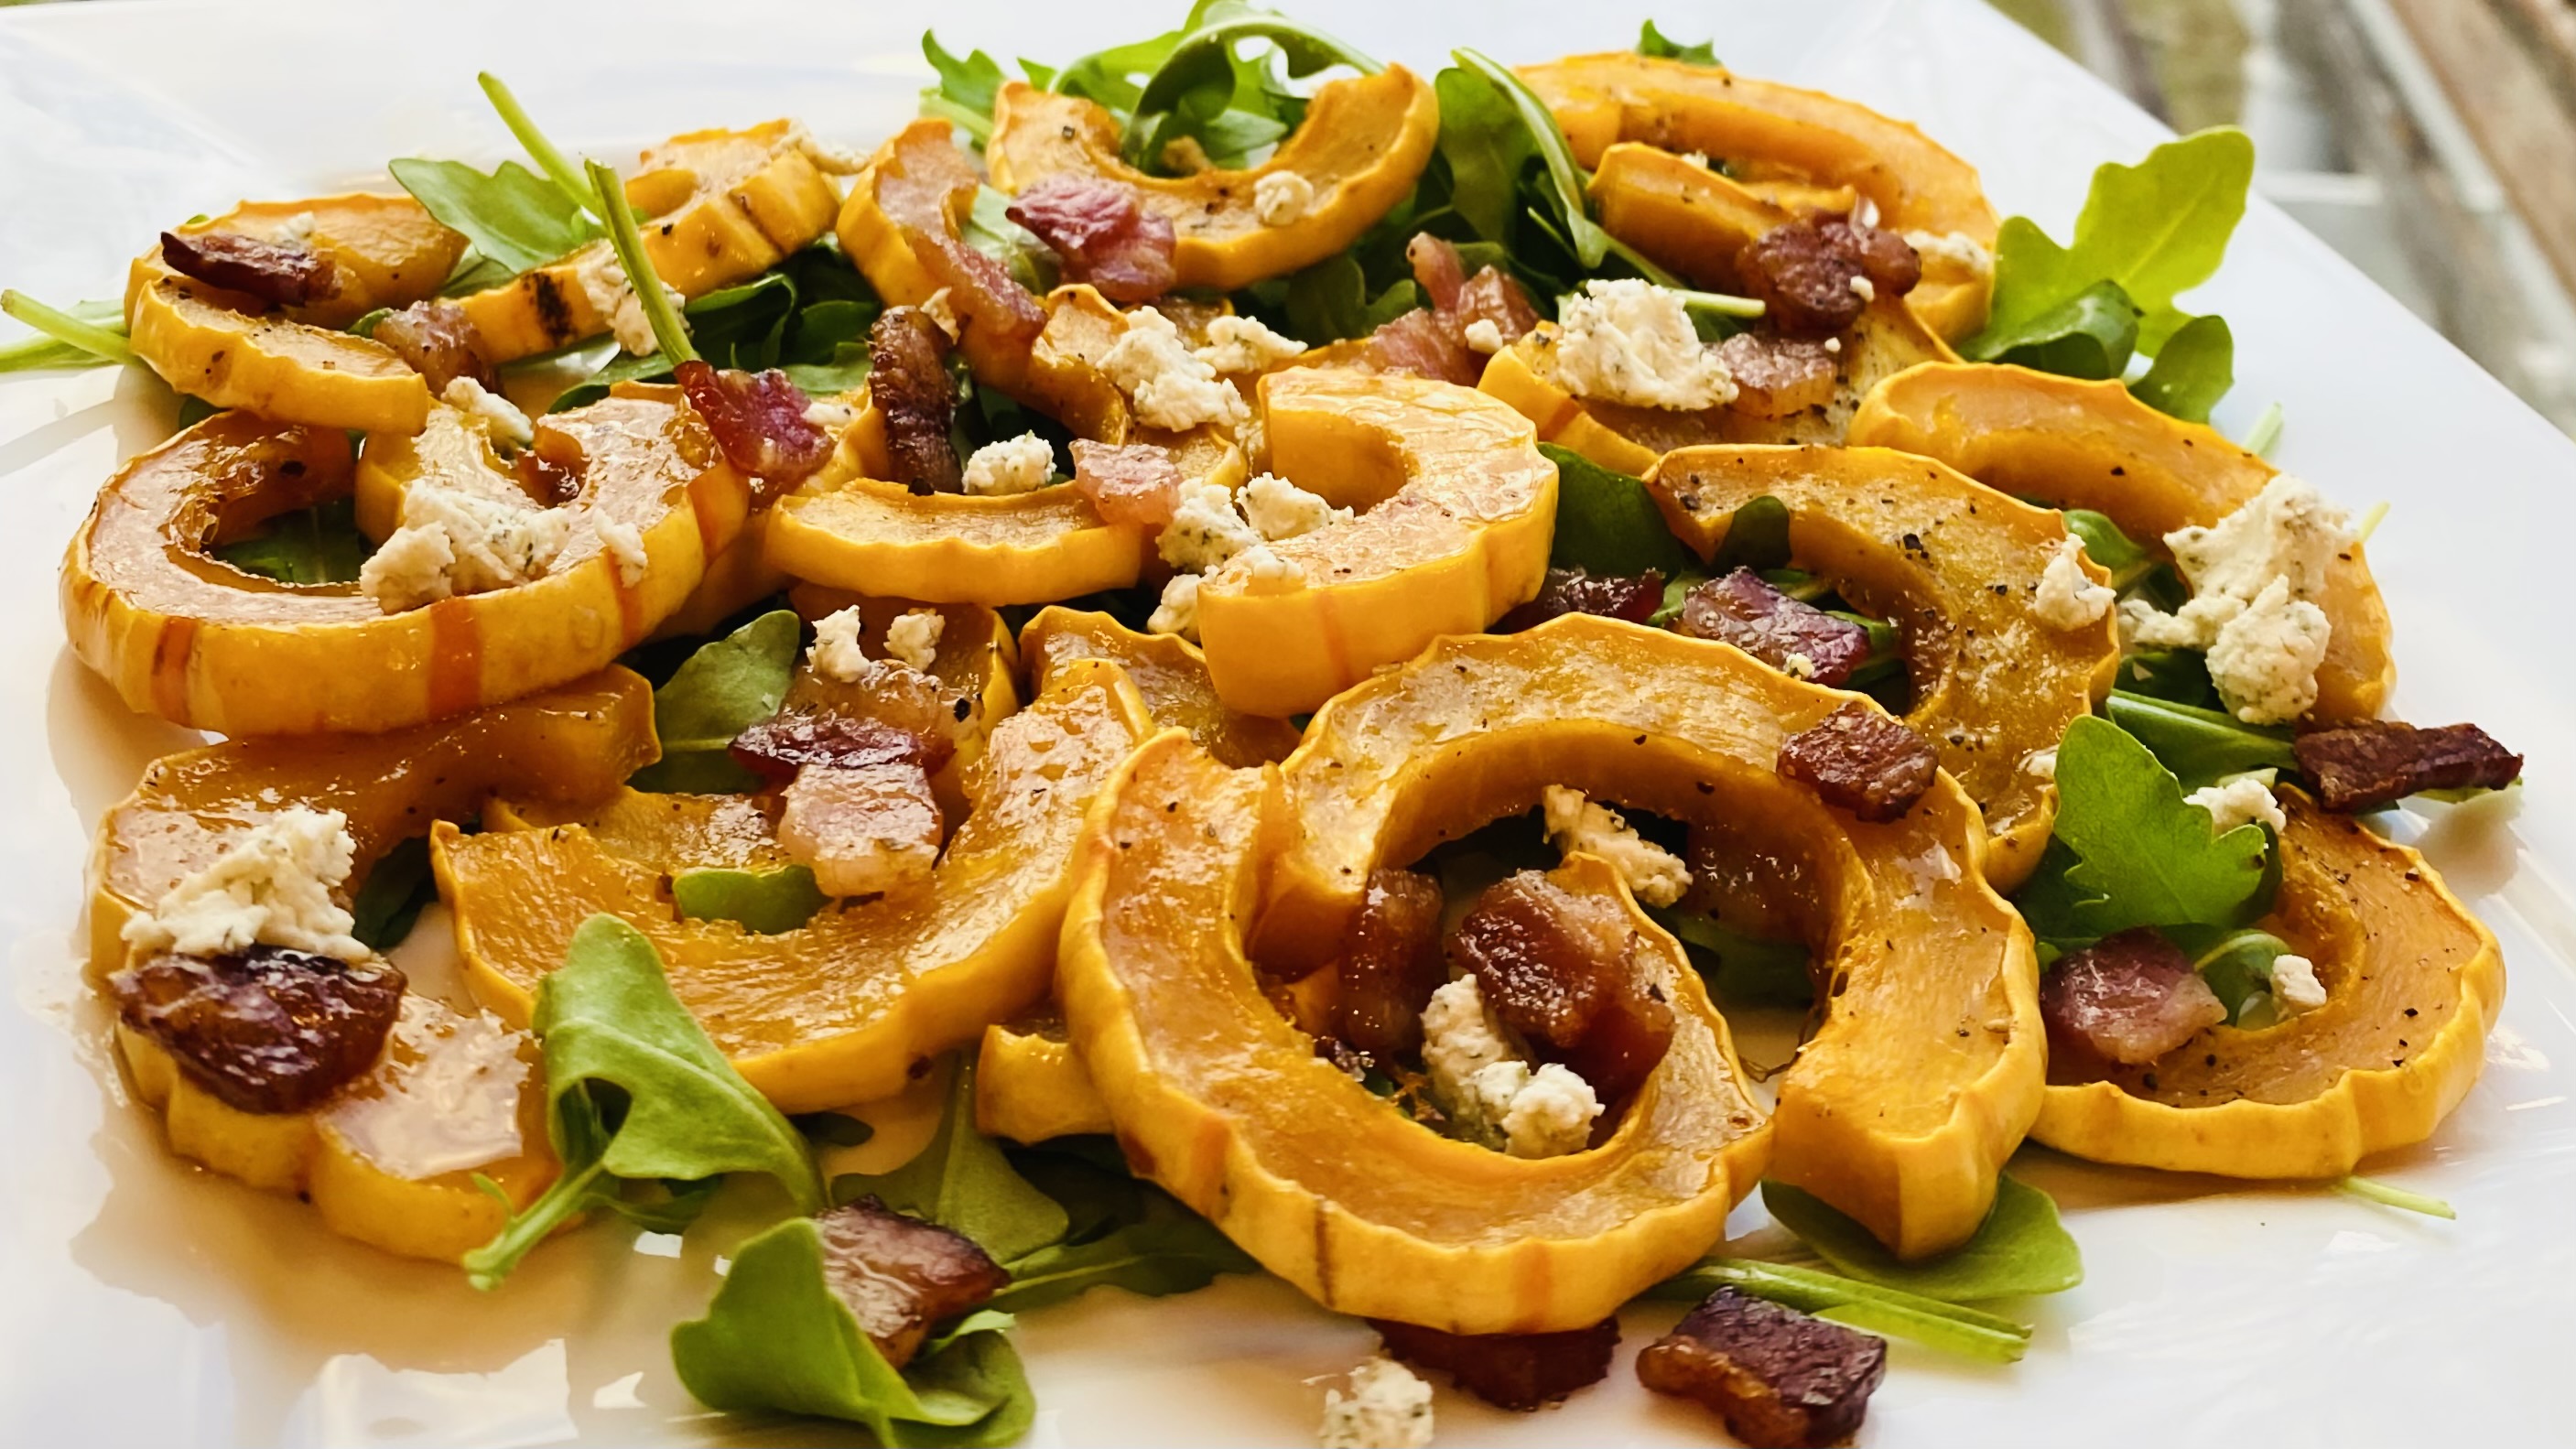 Harvest Recipe: Roasted Delicata Squash with Bacon, Local Maple Syrup and Goat Cheese